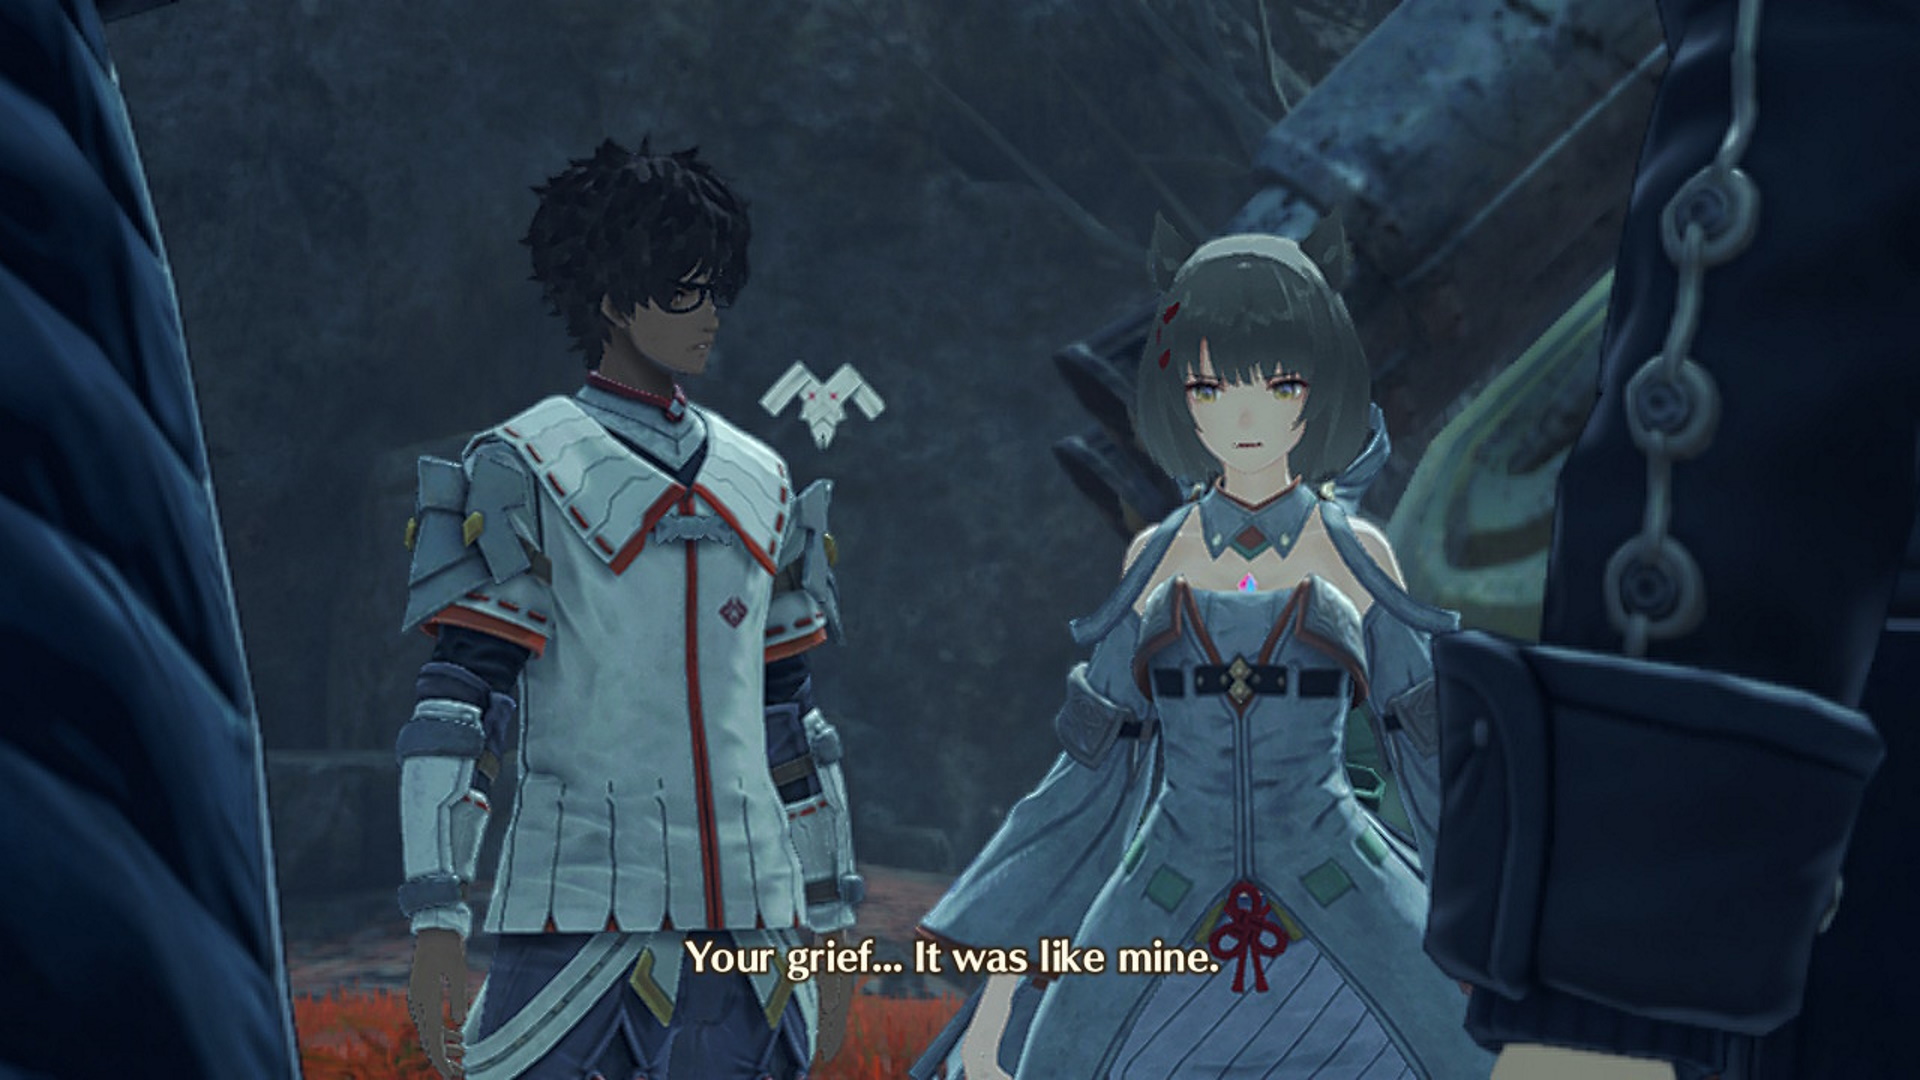 Each soldier in Xenoblade Chronicles 3 only lives 10 years.